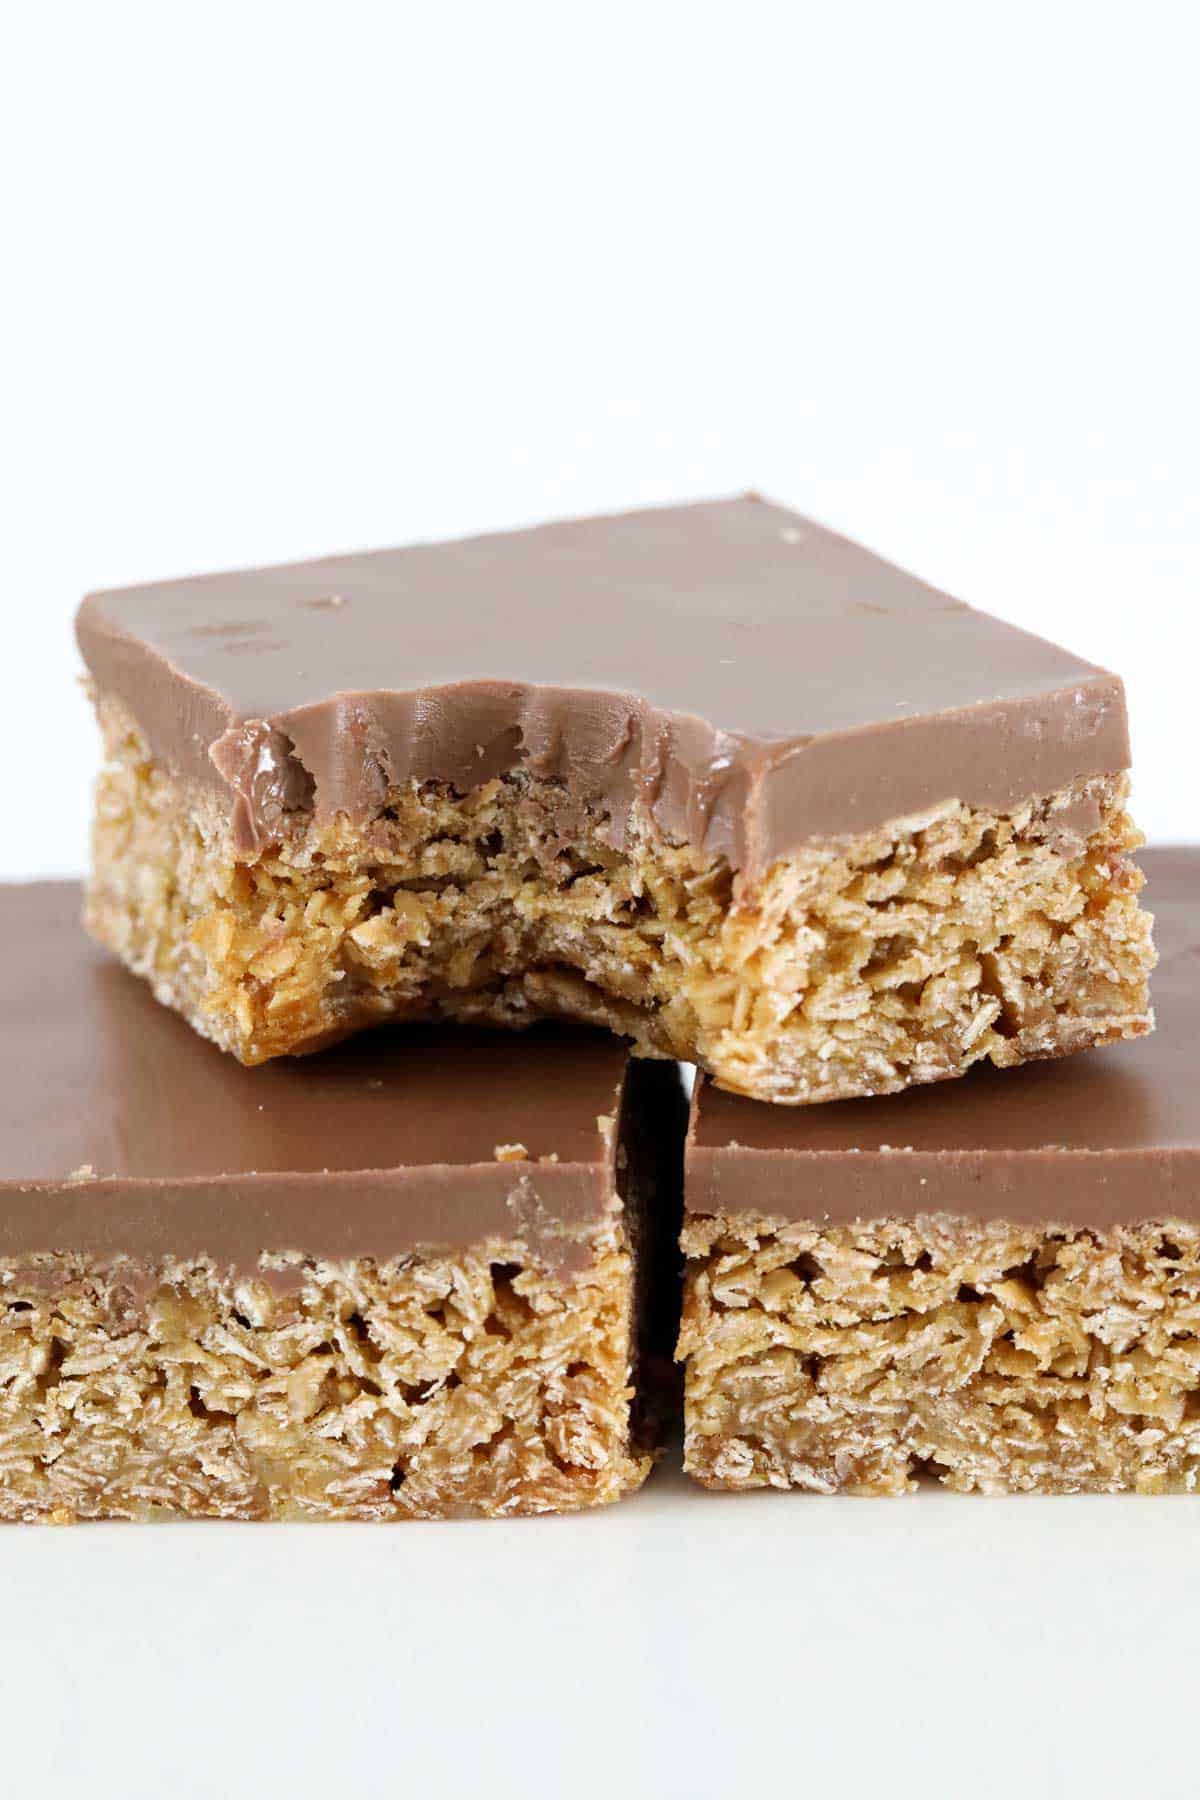 A stack of crunchy chocolate slice with a bite taken out of the top one.